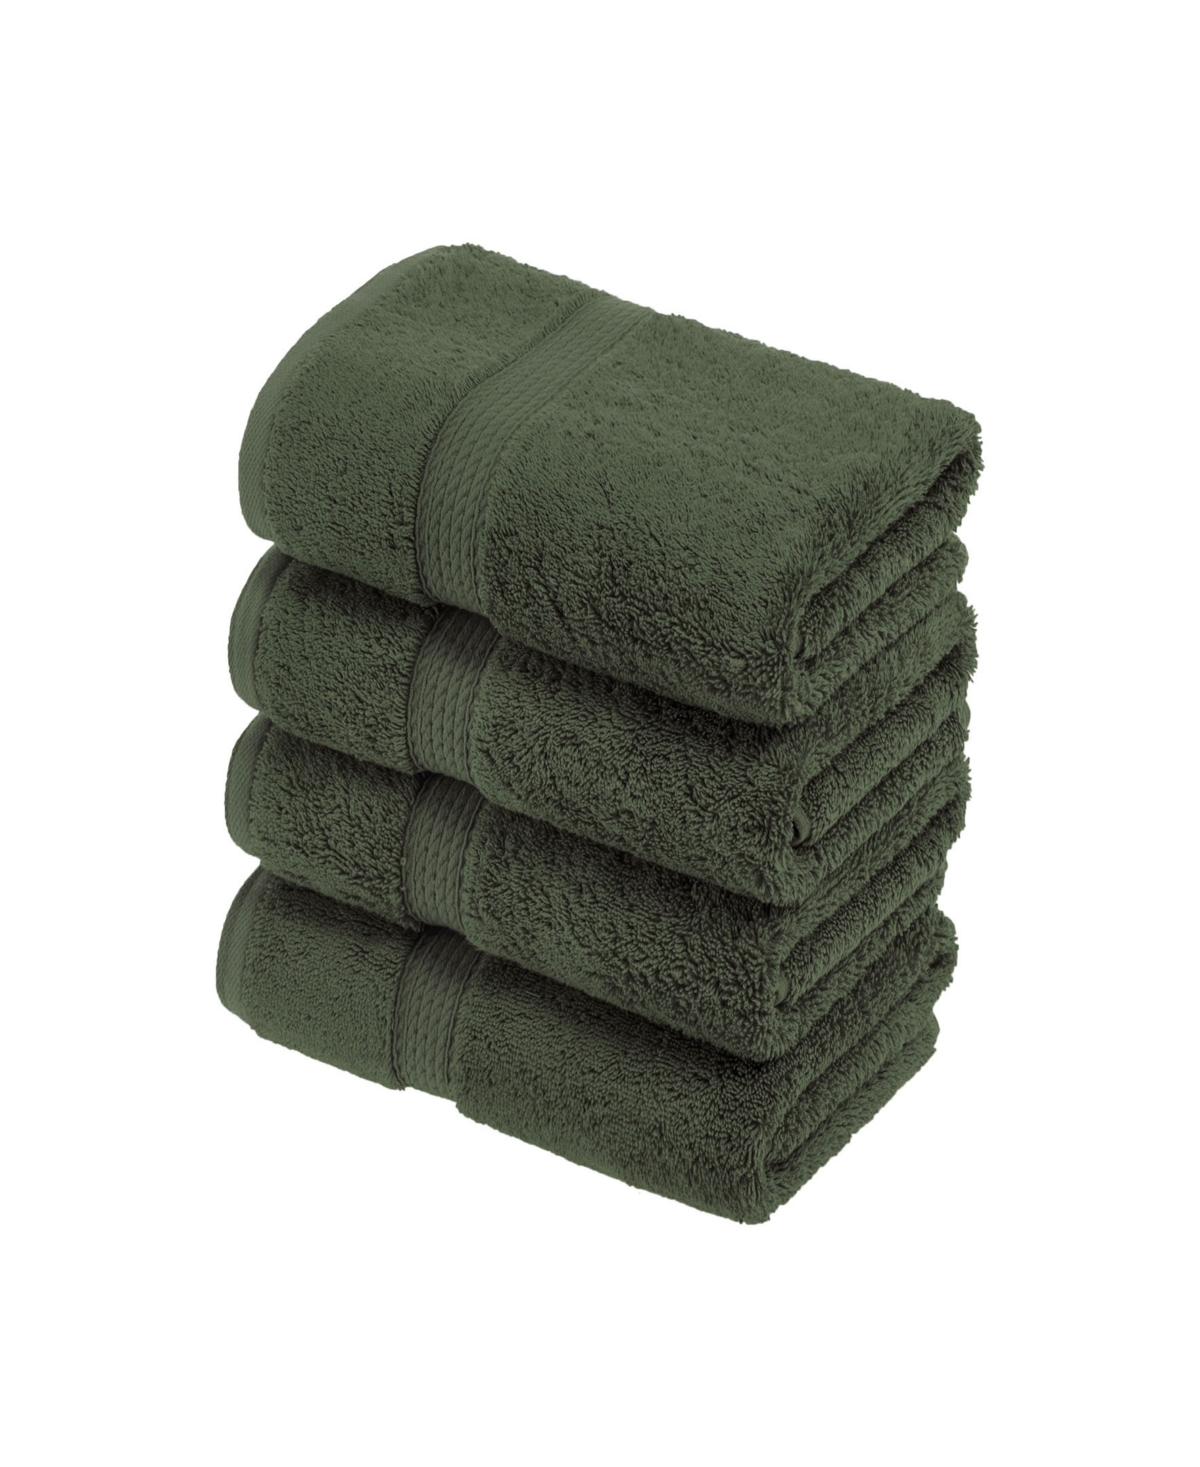 Superior Highly Absorbent 4 Piece Egyptian Cotton Ultra Plush Solid Hand Towel Set Bedding In Green